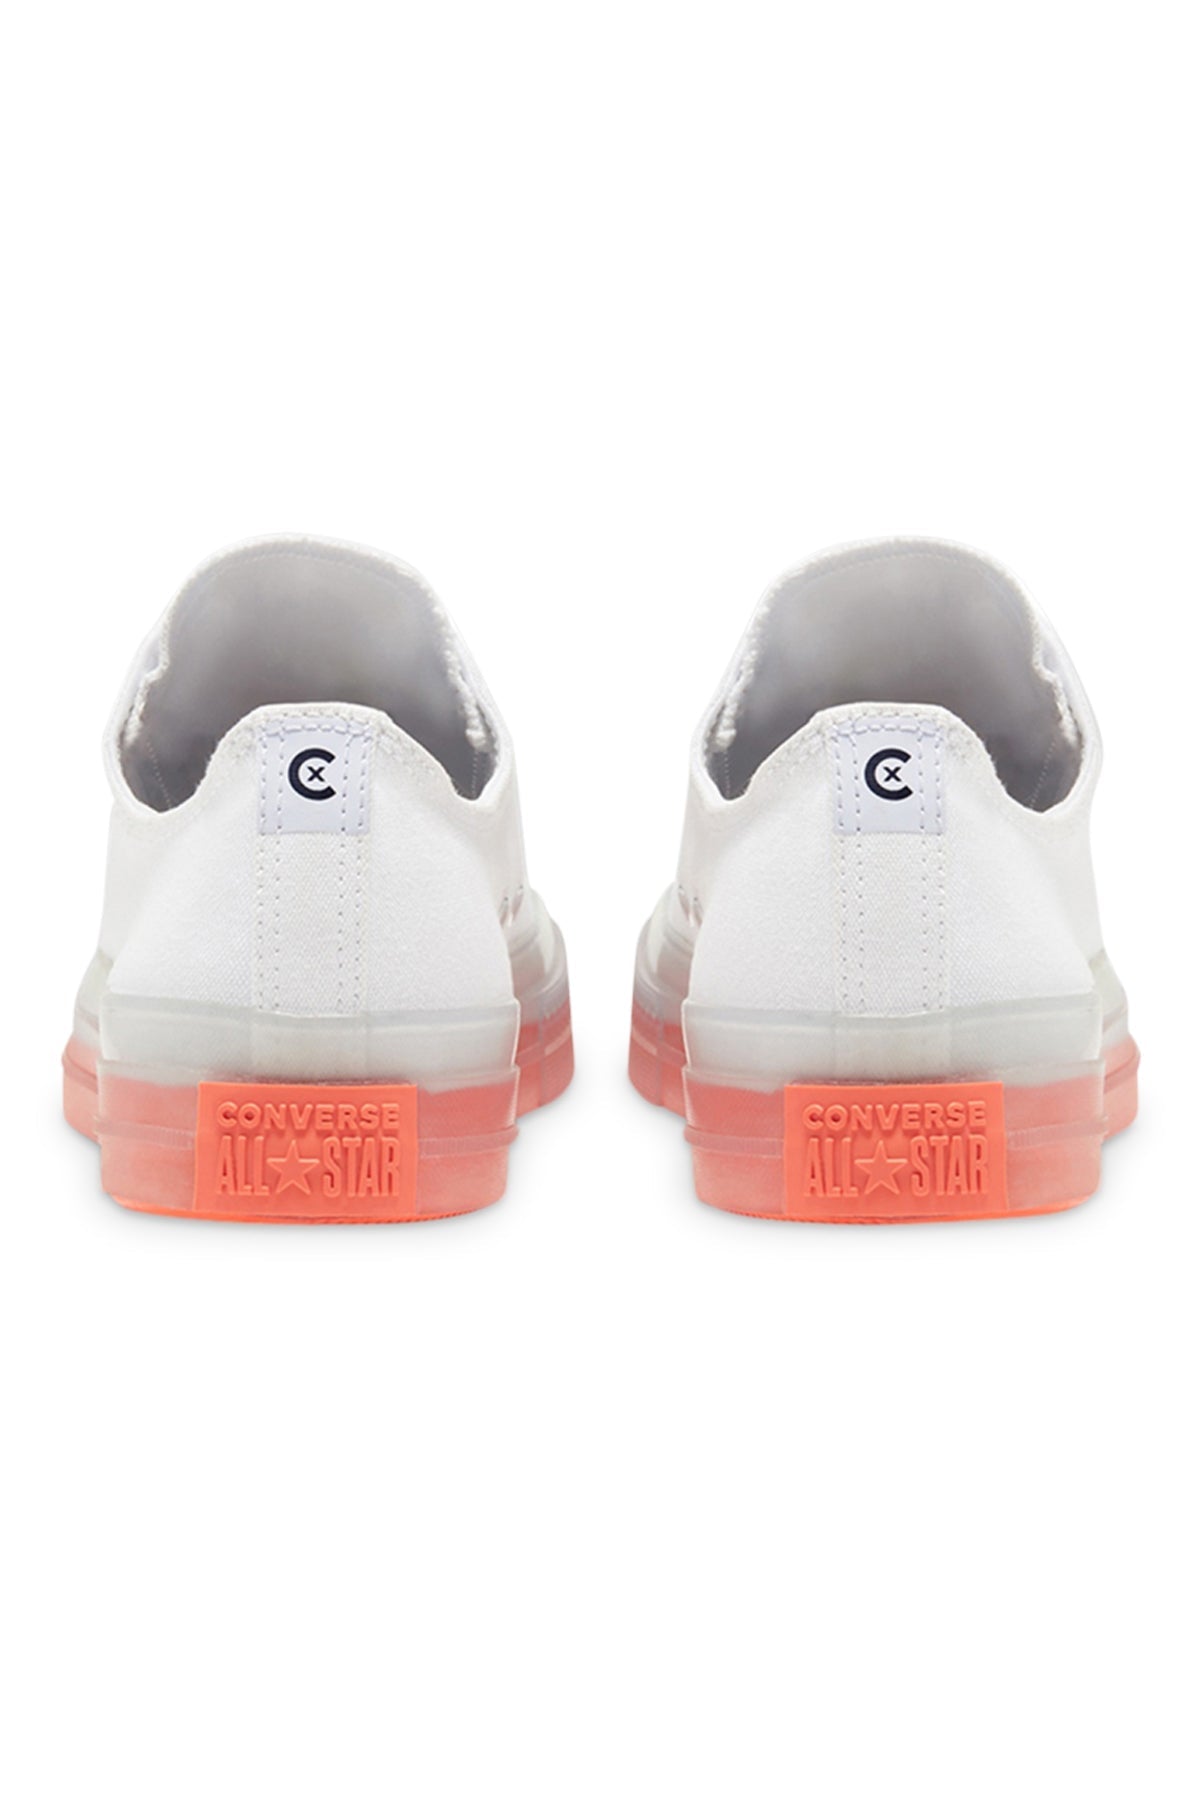 Converse CT CX Low Top White/Clear/Wild Mango Back